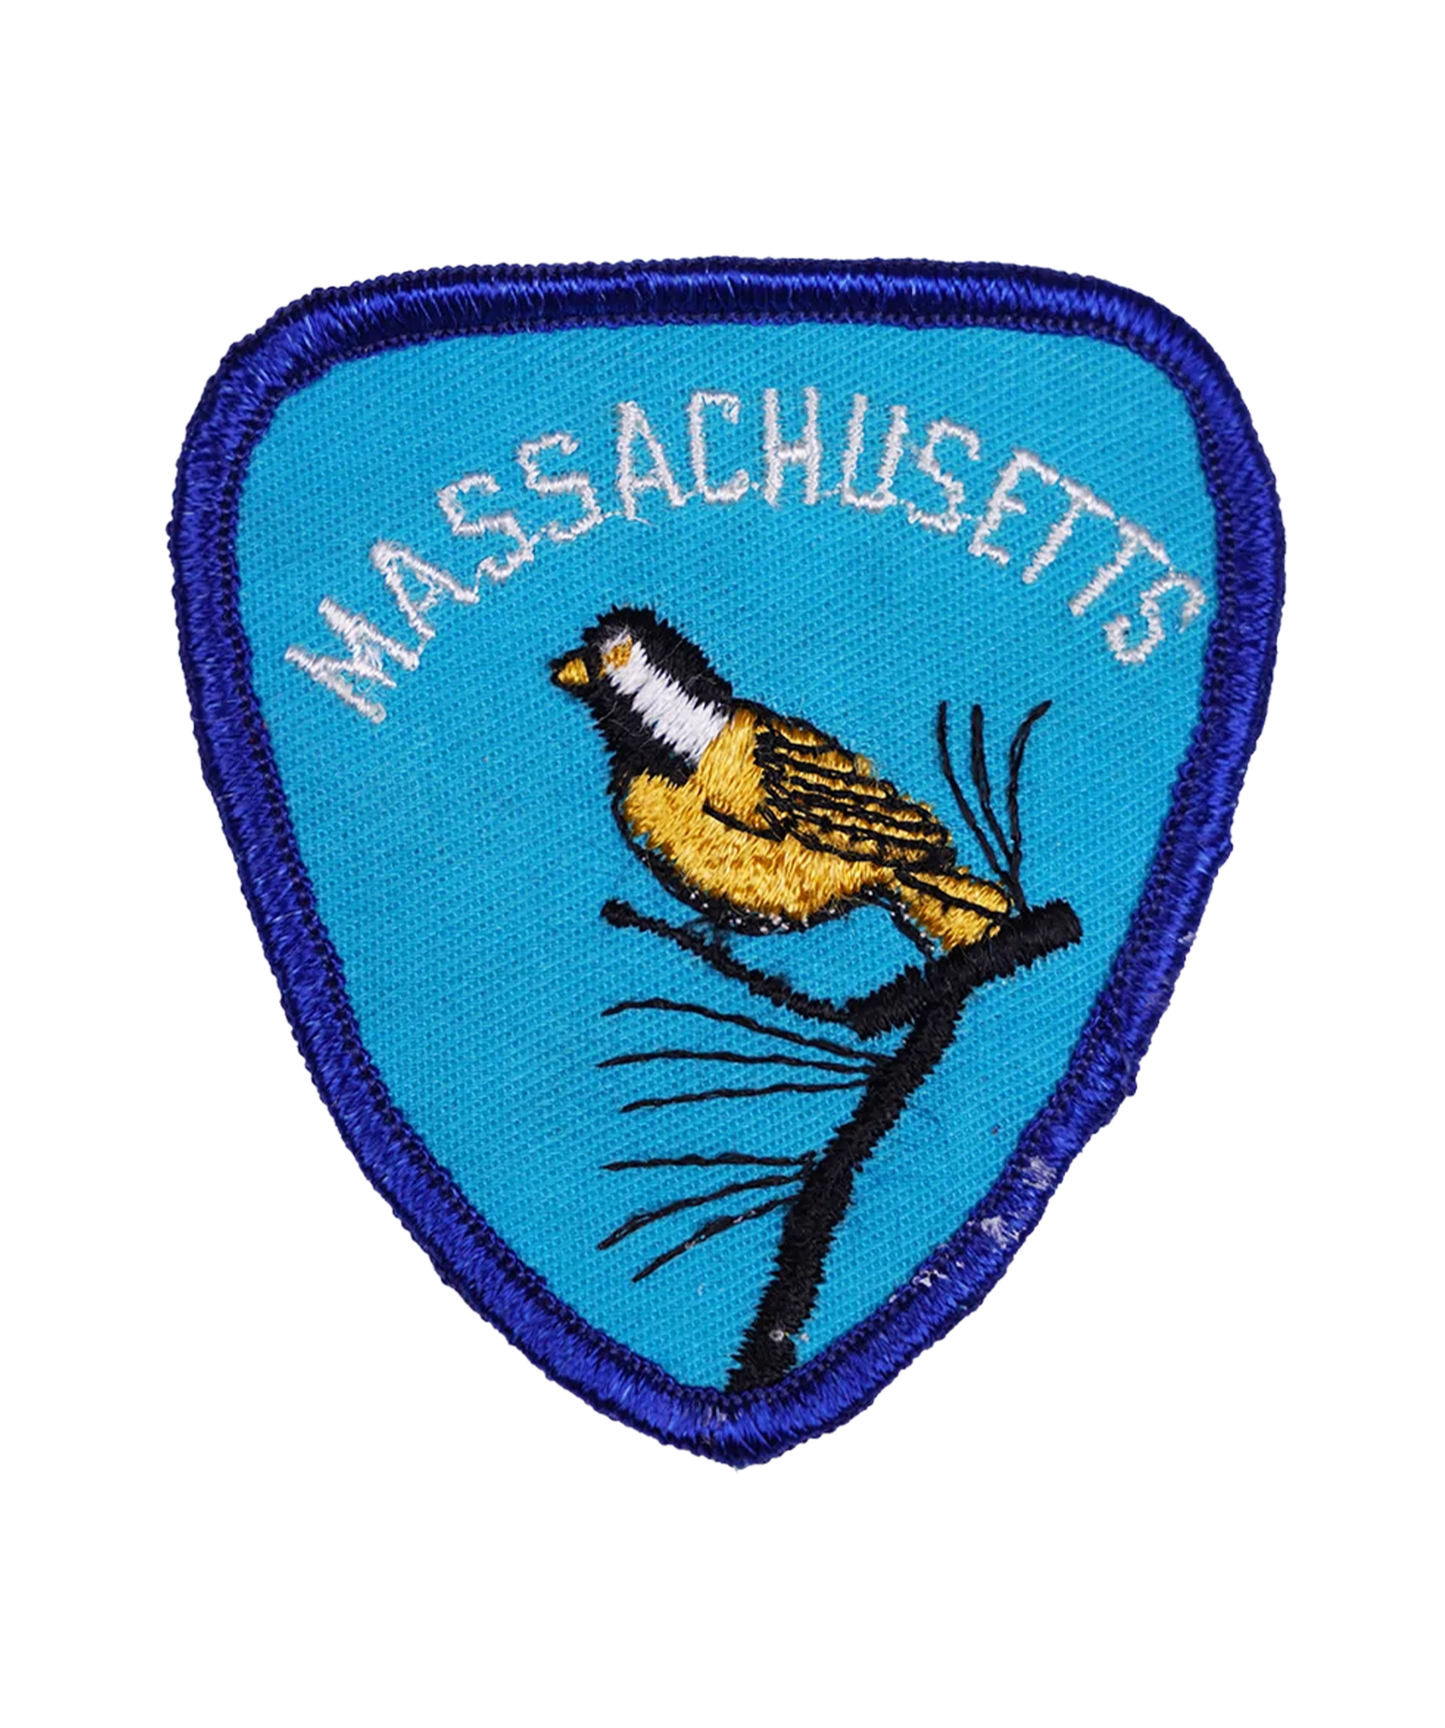 Vintage Massachusetts Embroidered Patch